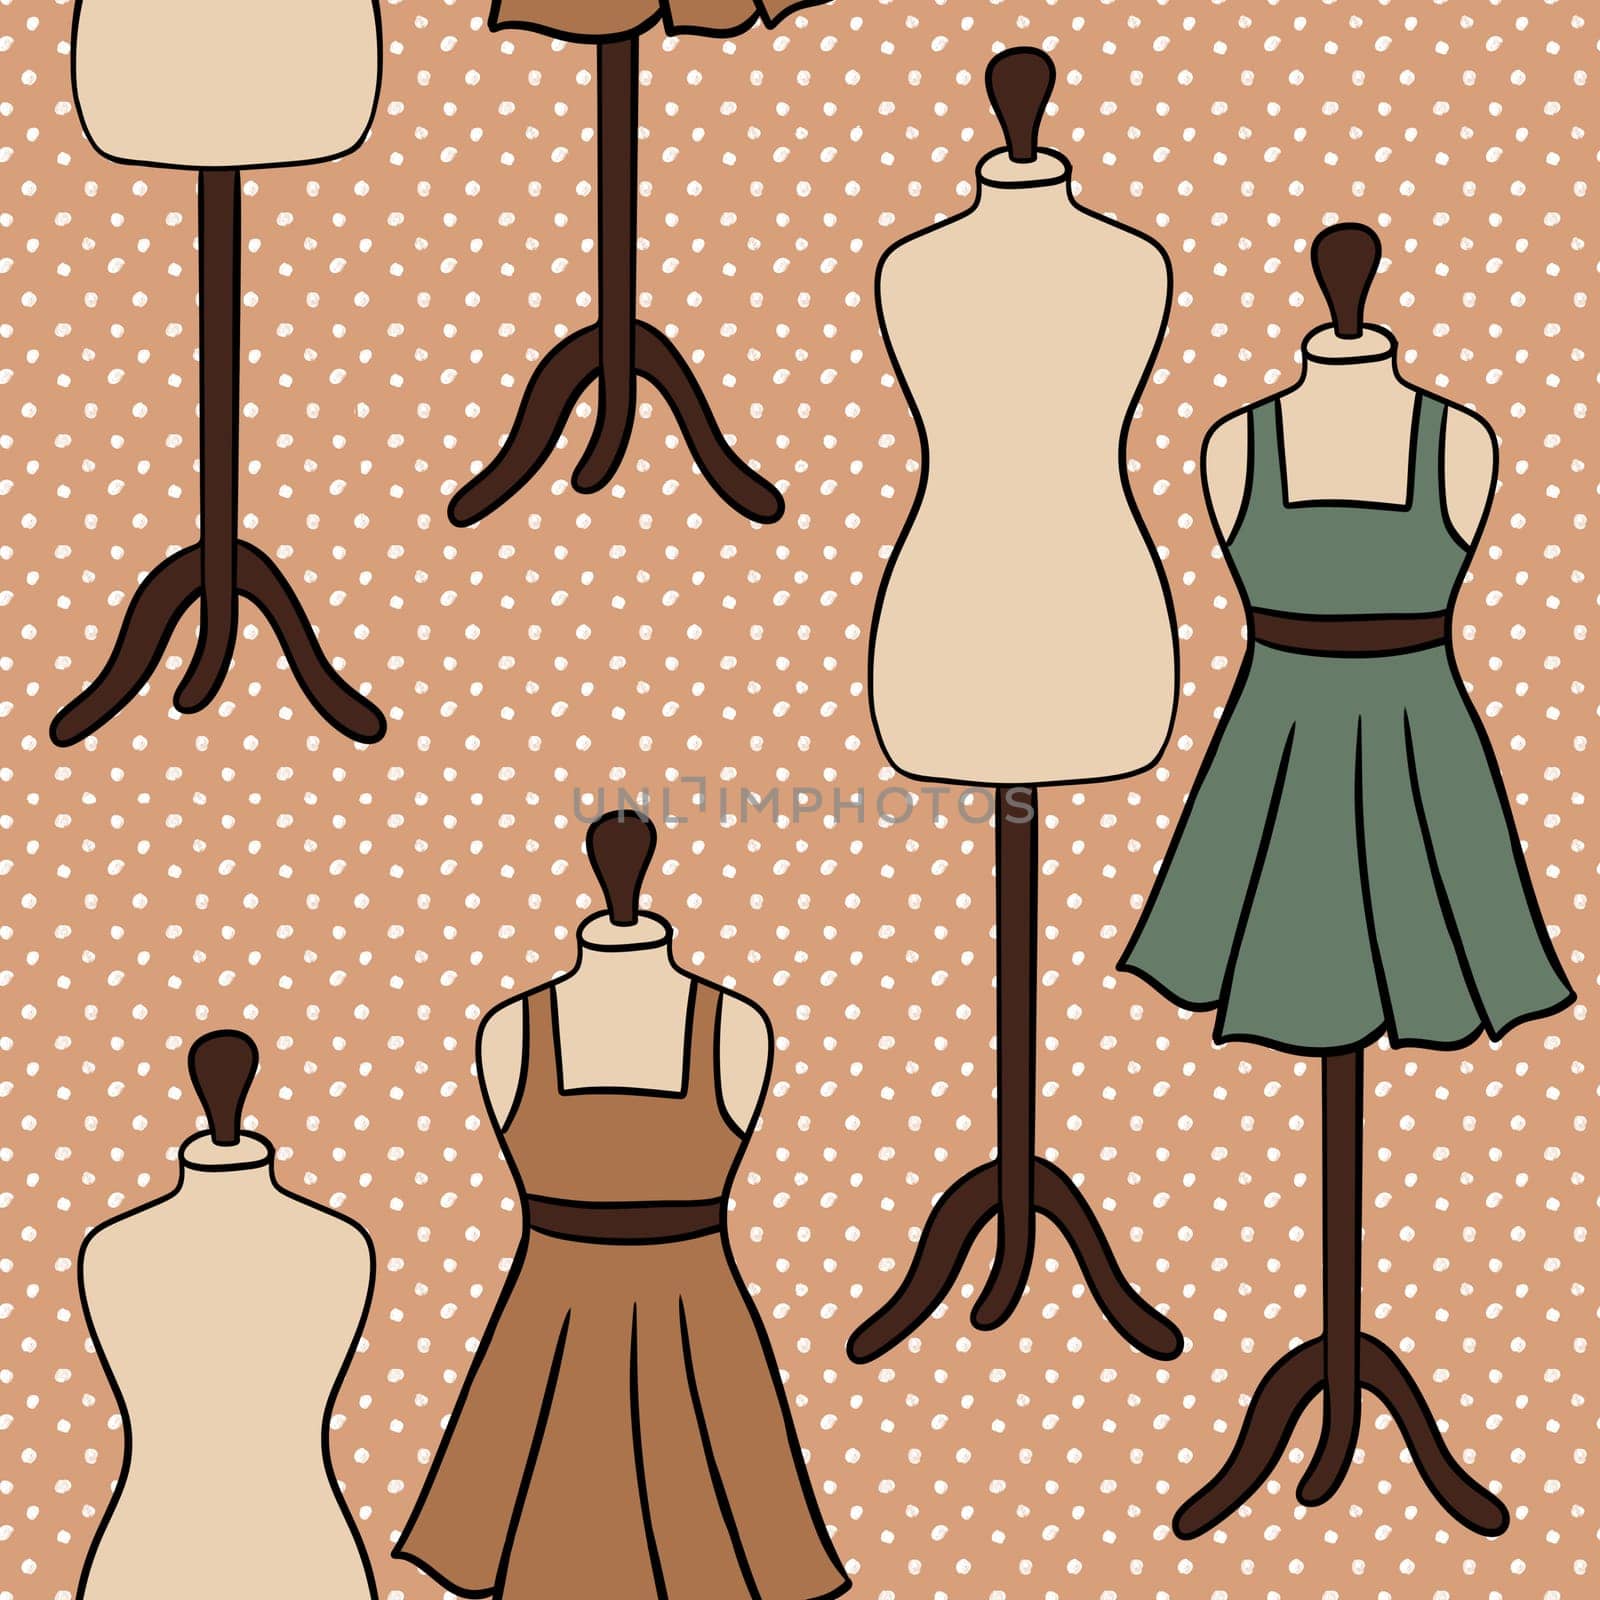 Hand drawn seamless pattern with mannequin dress clothes sewing crafts dressmaking items. Sage green brown beige polka dot background, tailor cute sew print, handmade needwork business hobby, fabric